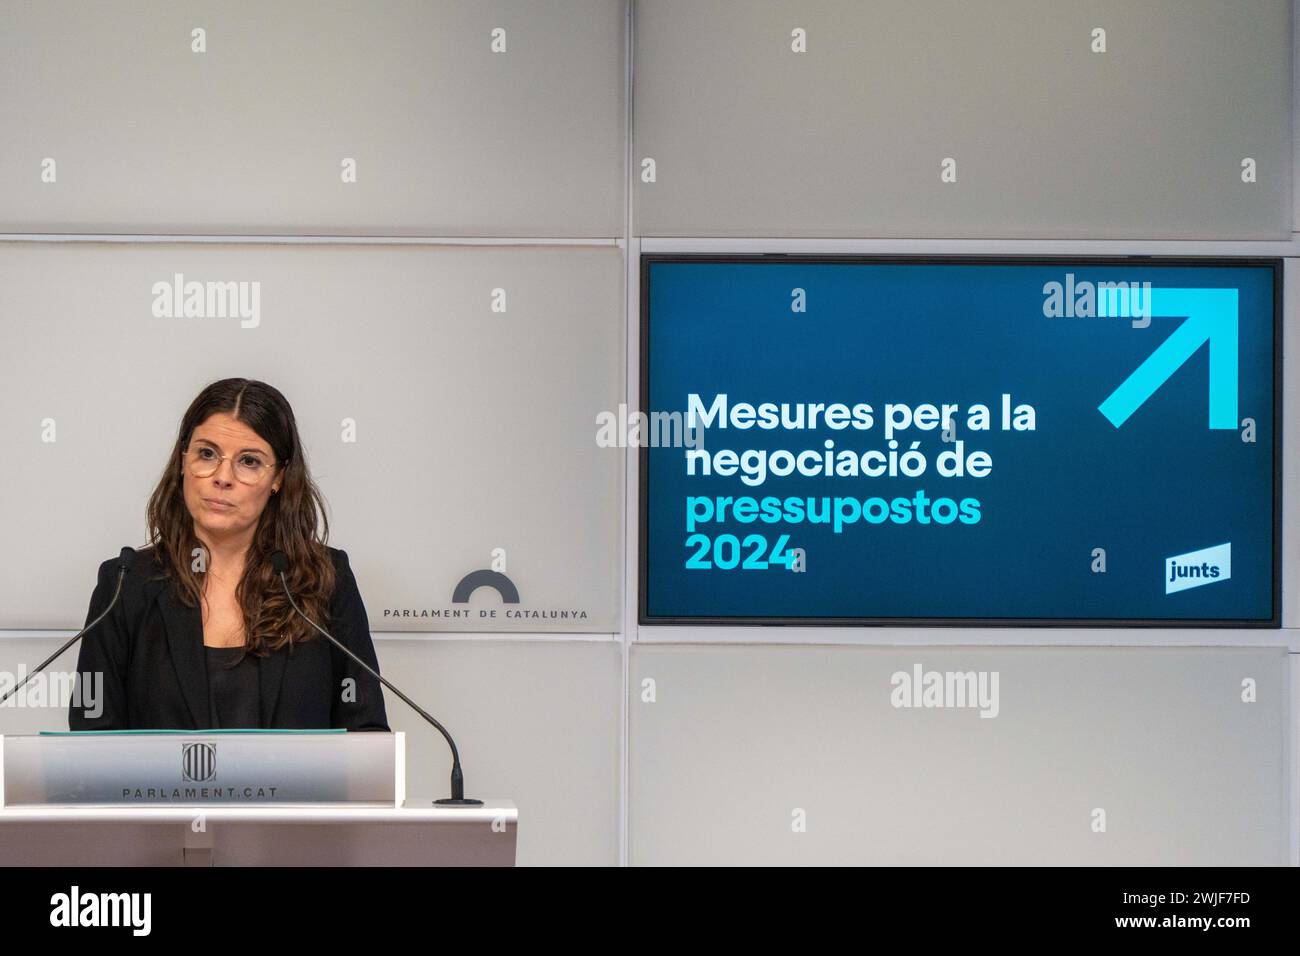 February, 15, 2024 Barcelona, Spain Politics Barcelona-Press conference of Junts. The spokesperson of the parliamentary group of the party 'junts' explains the conclusions reached in the negotiations with the government in order to approve the budgets of the Catalan government. They have demanded the management of the elimination of the inheritance tax on first-degree relatives, as well as measures to stimulate the economy.' 'La portavoz del grupo parlamentario del partido 'junts' explica las conclusiones a las que han llegado en las negociaciones con el gobierno para aprobar los presupuestos Stock Photo